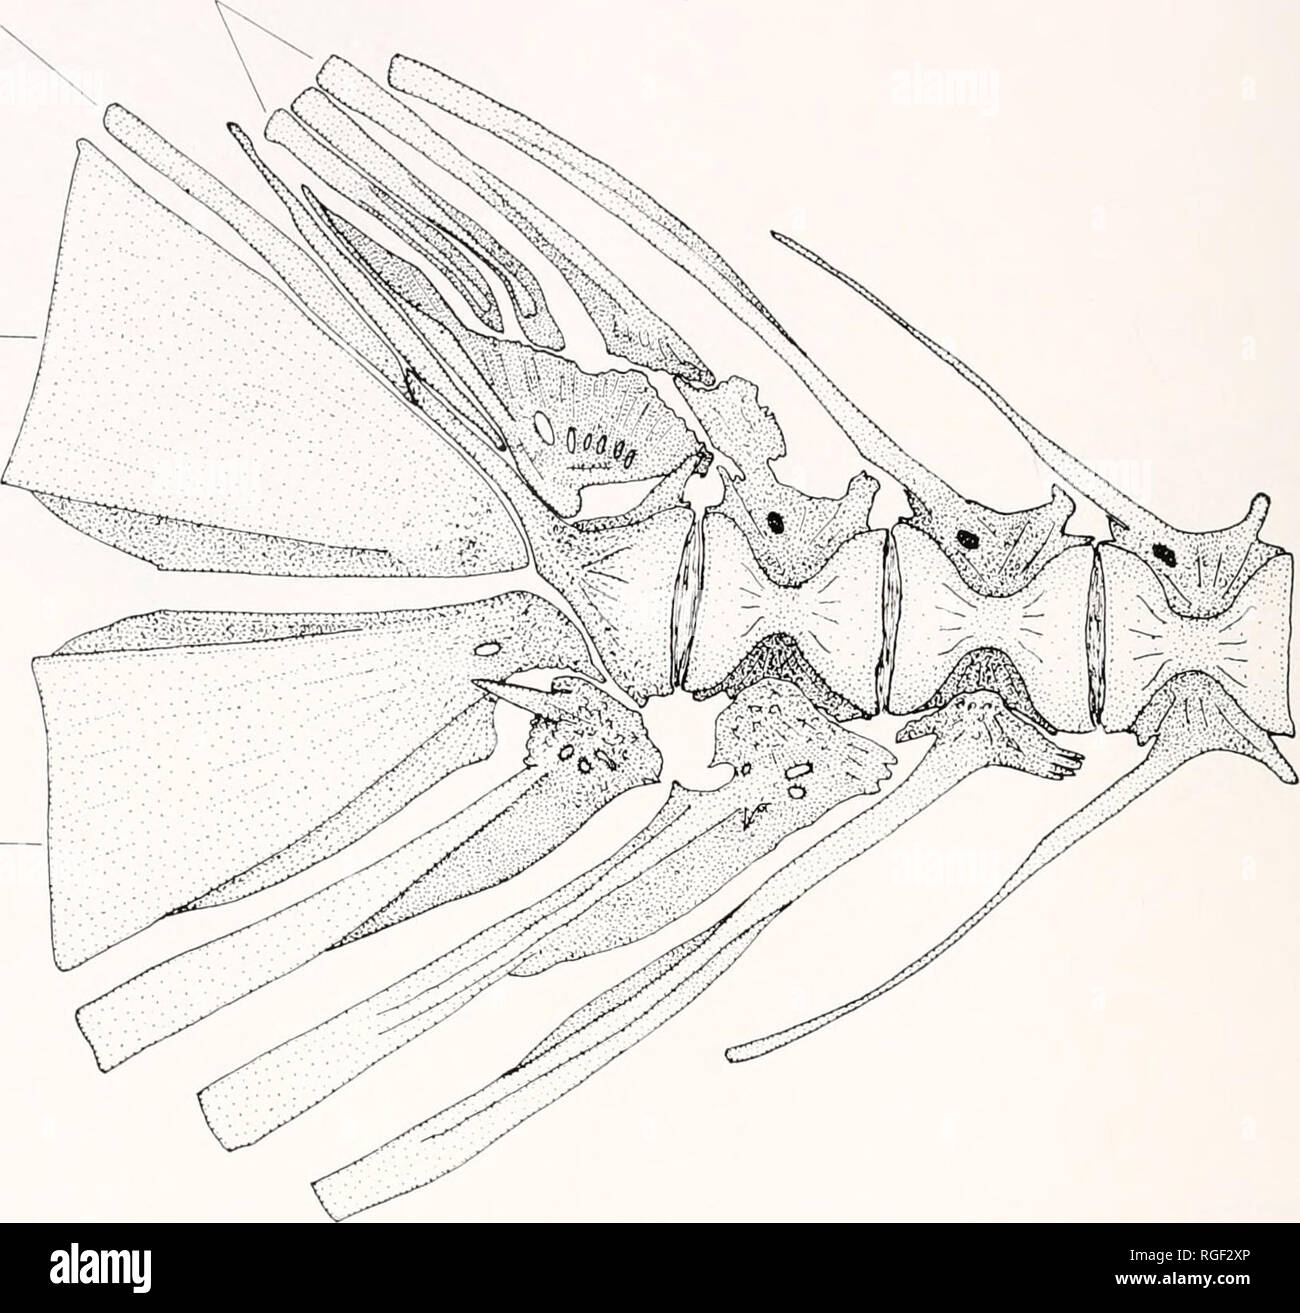 . Bulletin of the Museum of Comparative Zoology at Harvard College. Zoology. 76 Bulletin Museum of Comparative Zoology, Vol. 135, No. 2 EPURALS HYPURAL 6 HYPURAL 4+5 — HYPURAL 2 + 3 —. Figure 24. Caudal skeleton of Nomeus gronovii, drawing of a cieored-and-stained preparation from an 87-mm specimen. All elements identified in Figure 1. 1965, from the Sea of Japan is a probable .synonym. Psenopsis humero.su Munro, 1958. Dam- pier Archipelago, N. W. Australia. Deep- bodied. D VII, 28. A III 25. P 22. Gill- rakers 12 on lower limb of first arch (from Munro, 1958). Probably a good species, little  Stock Photo